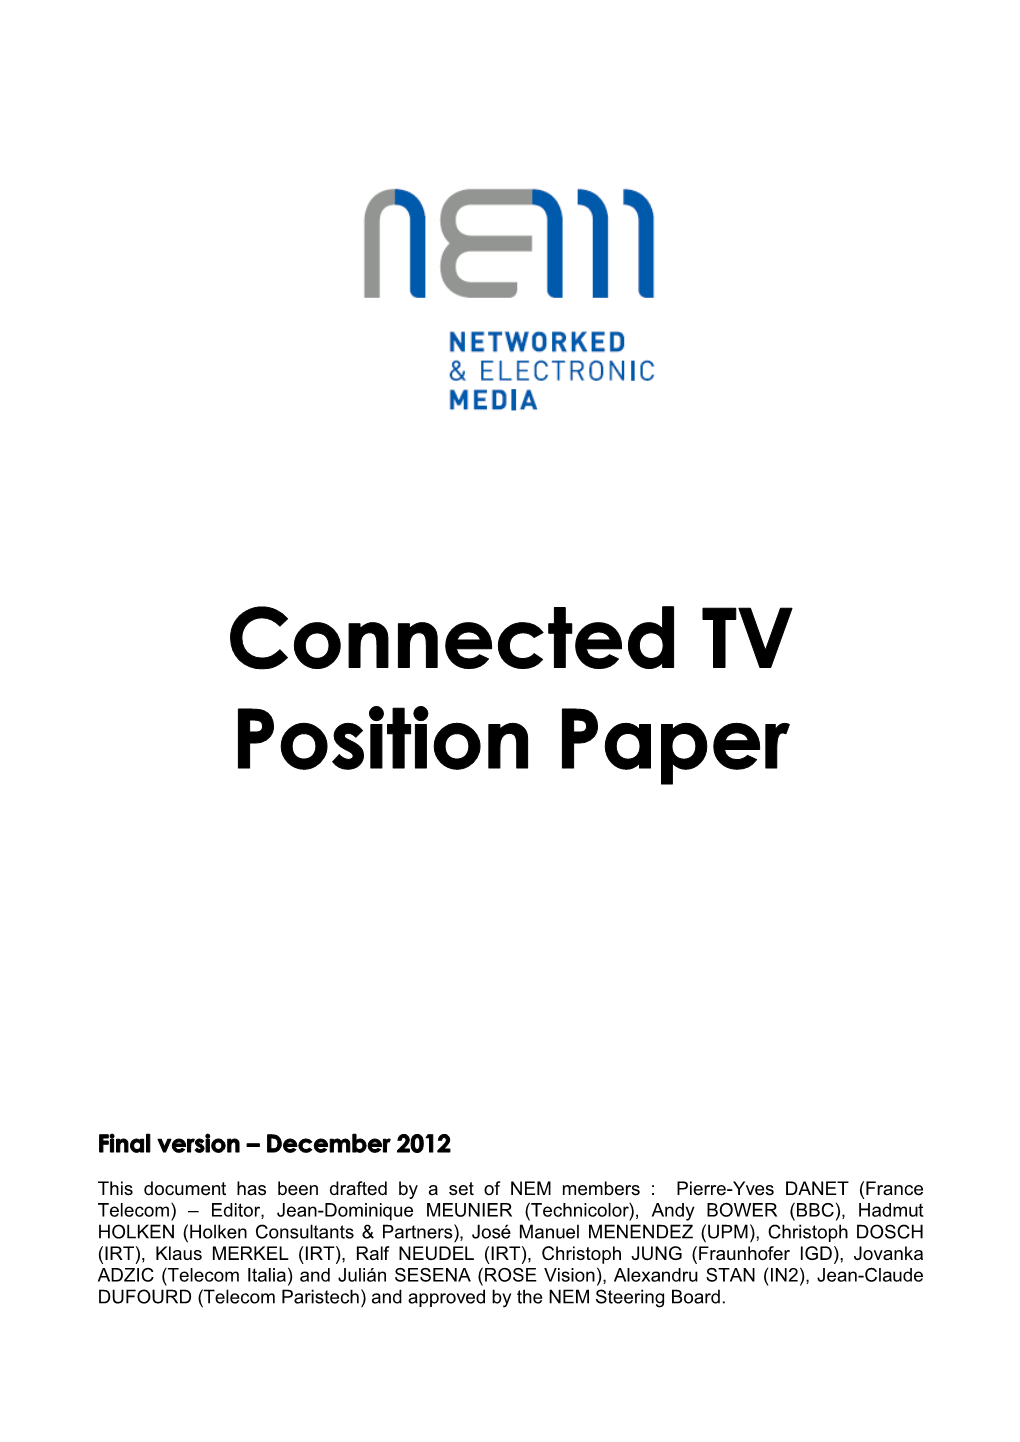 Position Paper on Connected TV